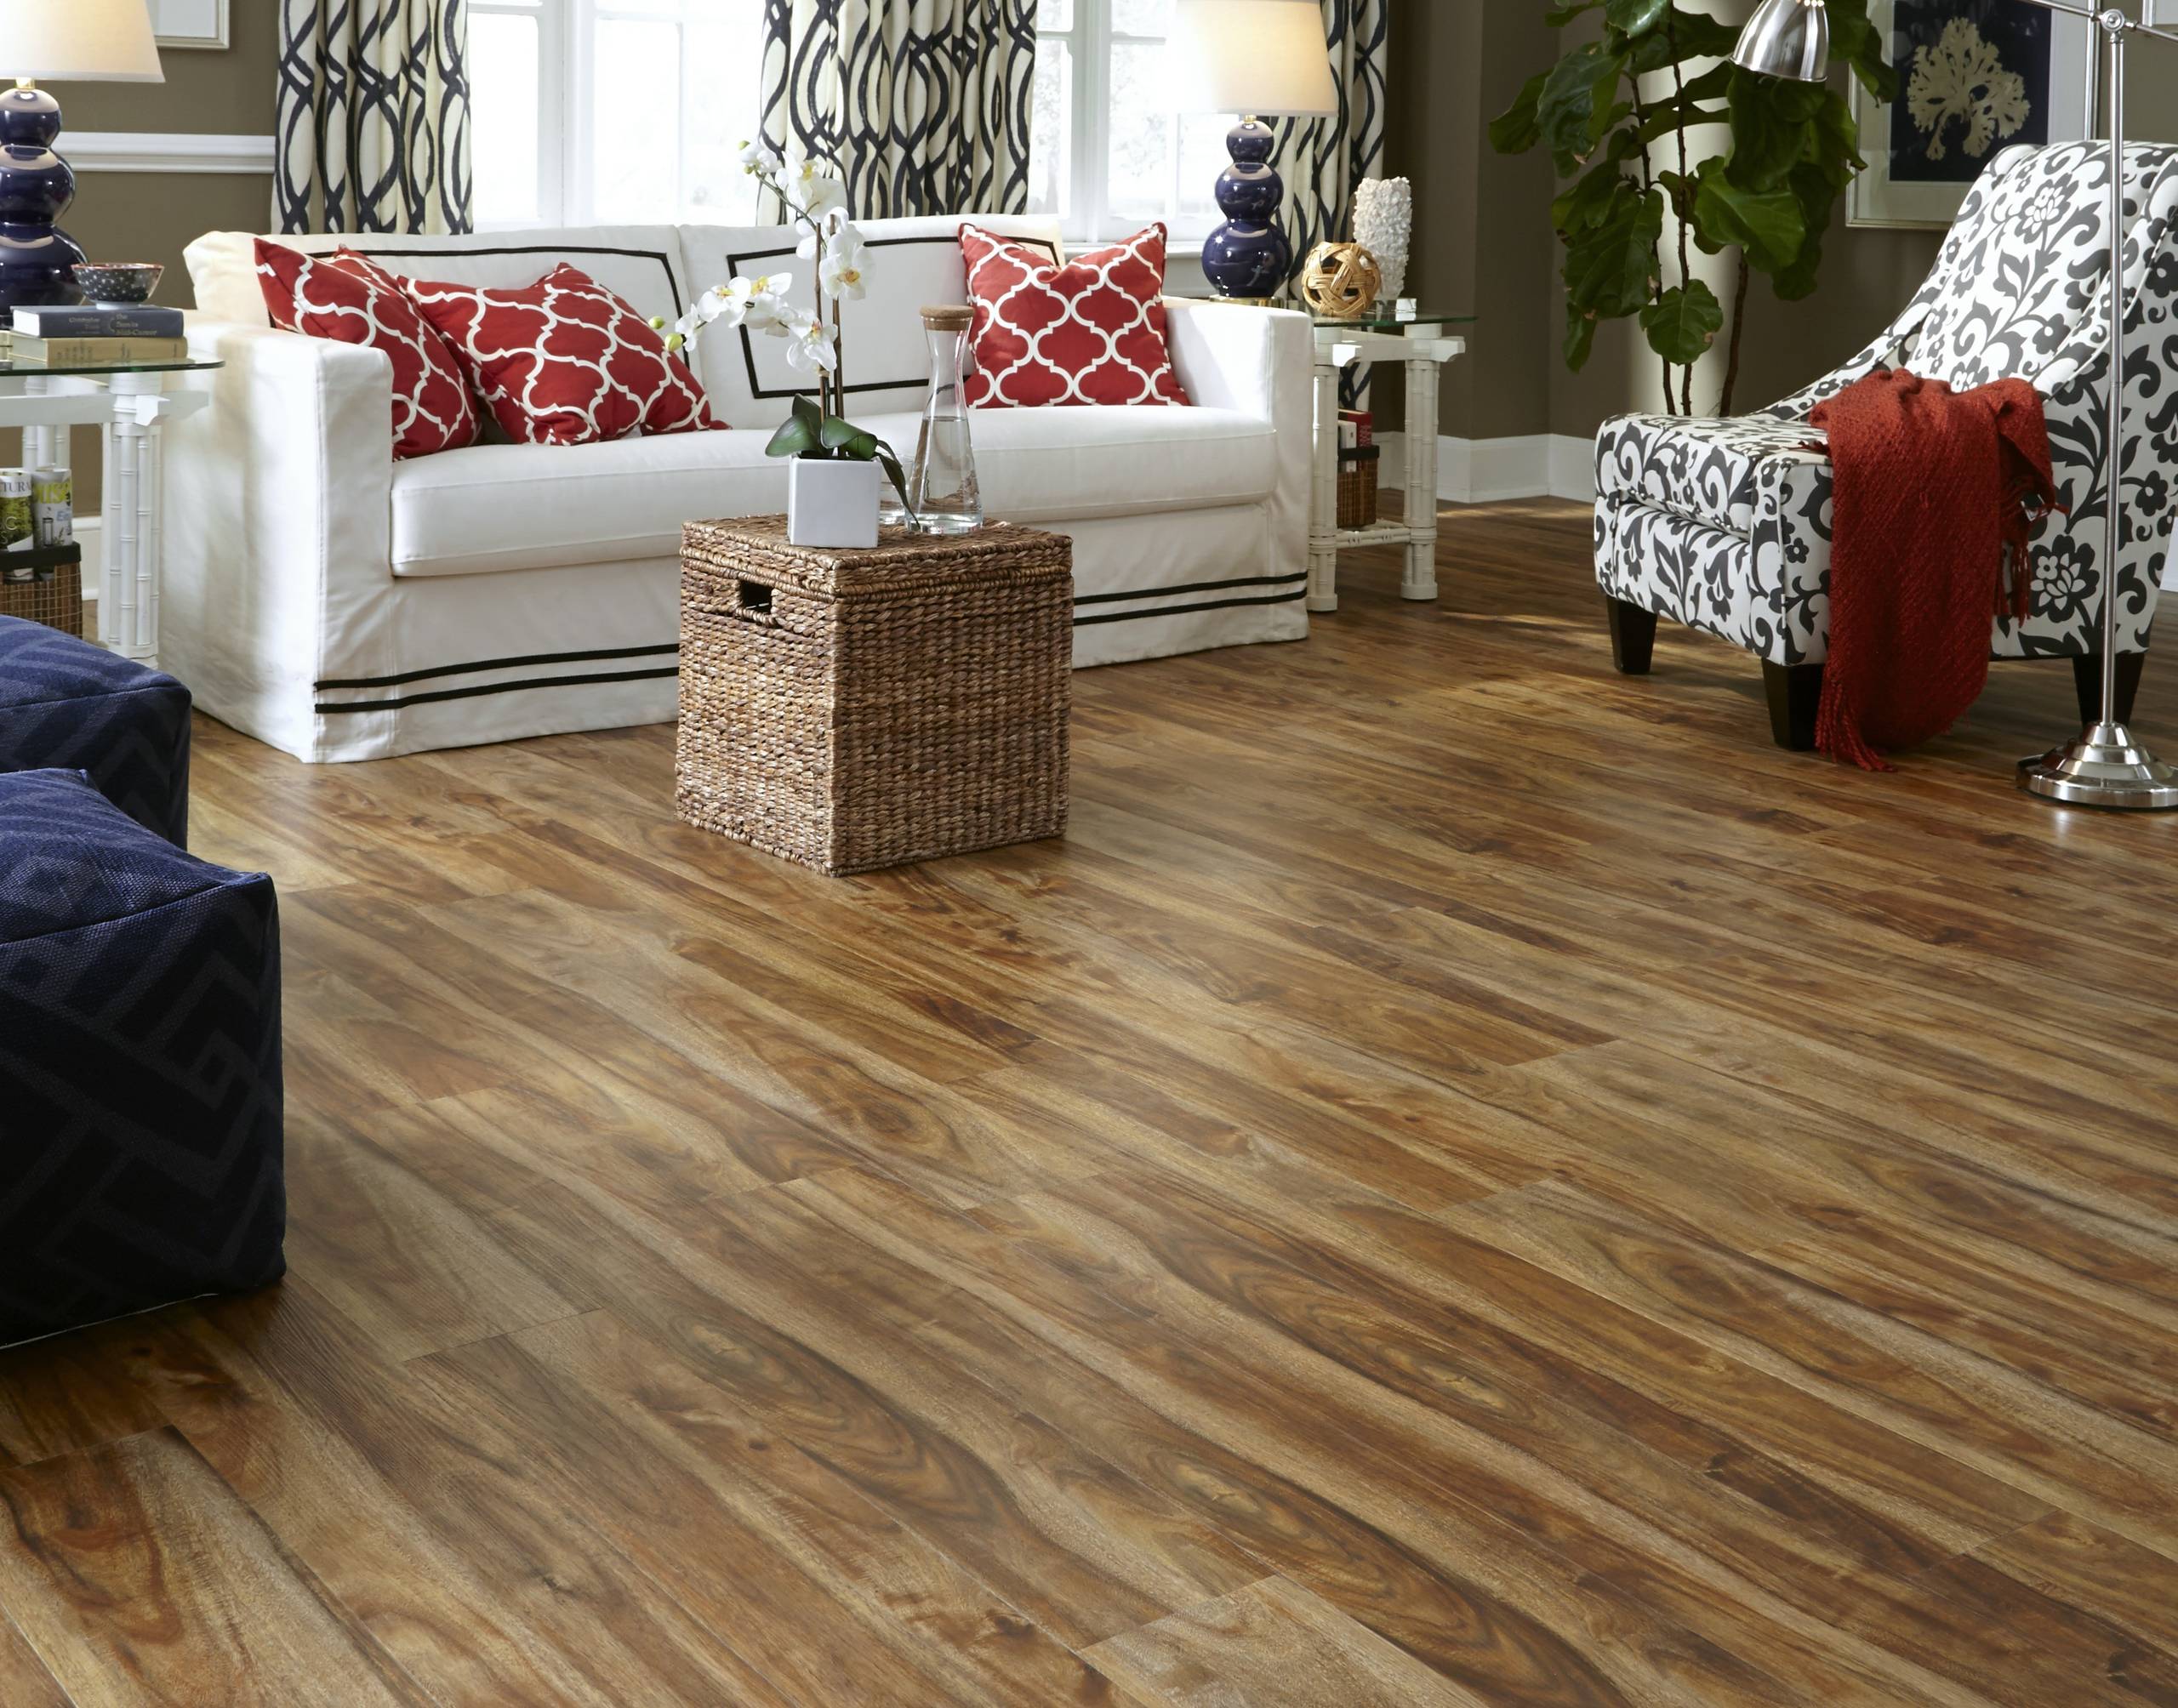 Tranquility 5mm Rustic Acacia, Tranquility Ultra Vinyl Flooring Reviews